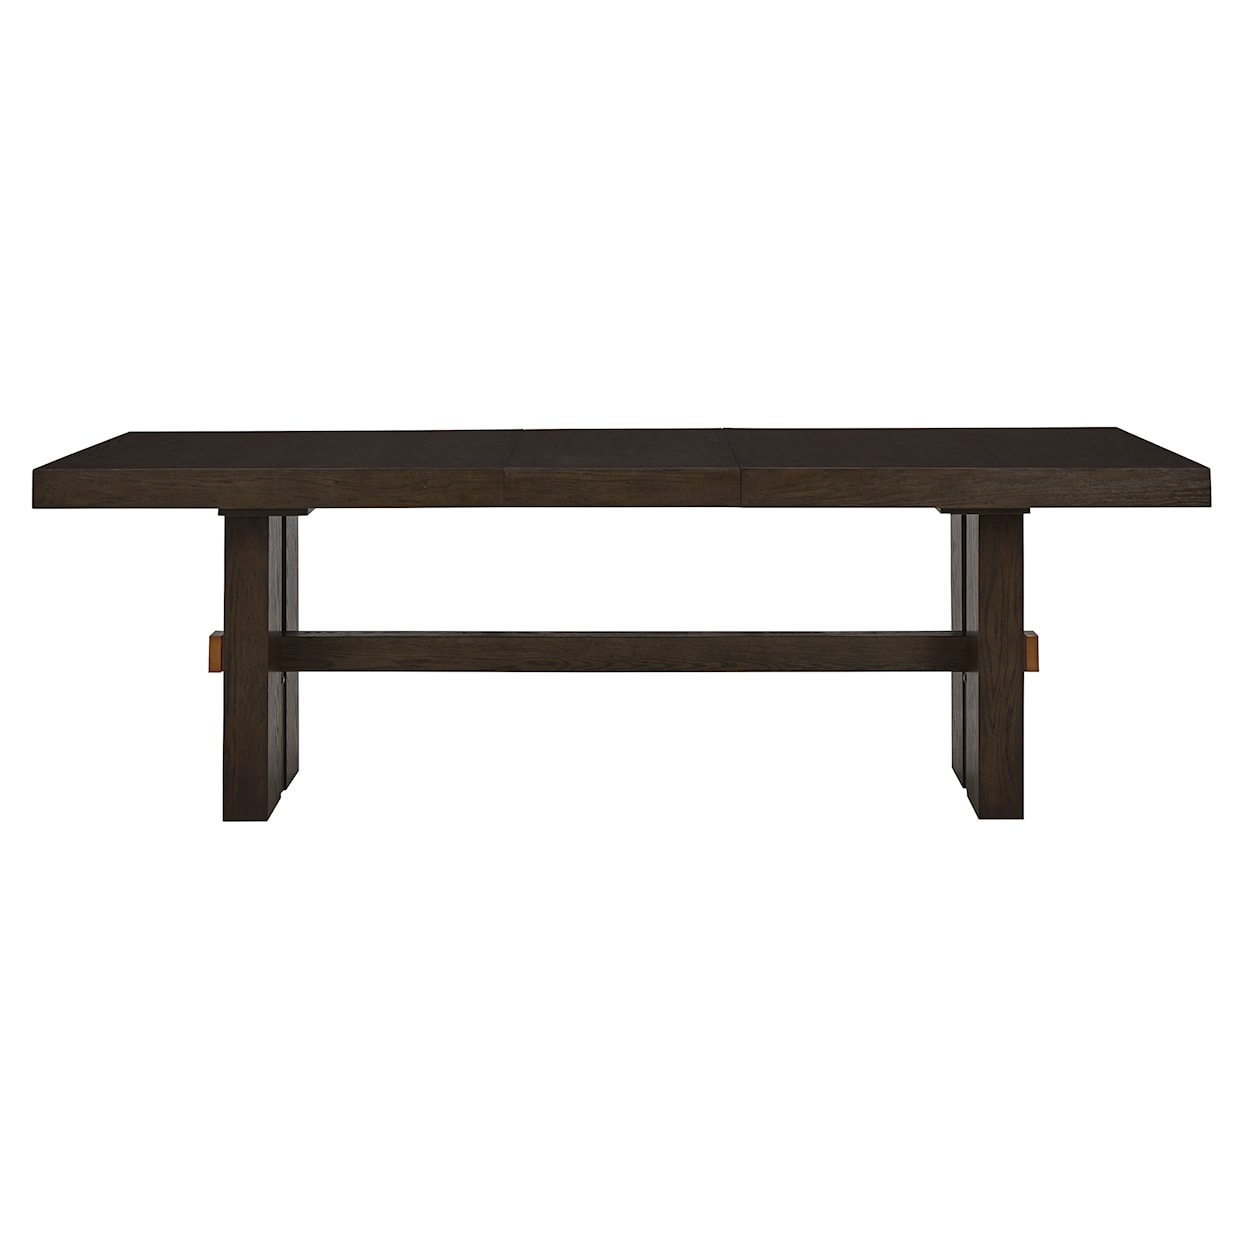 Signature Design by Ashley Burkhaus Dining Extension Table